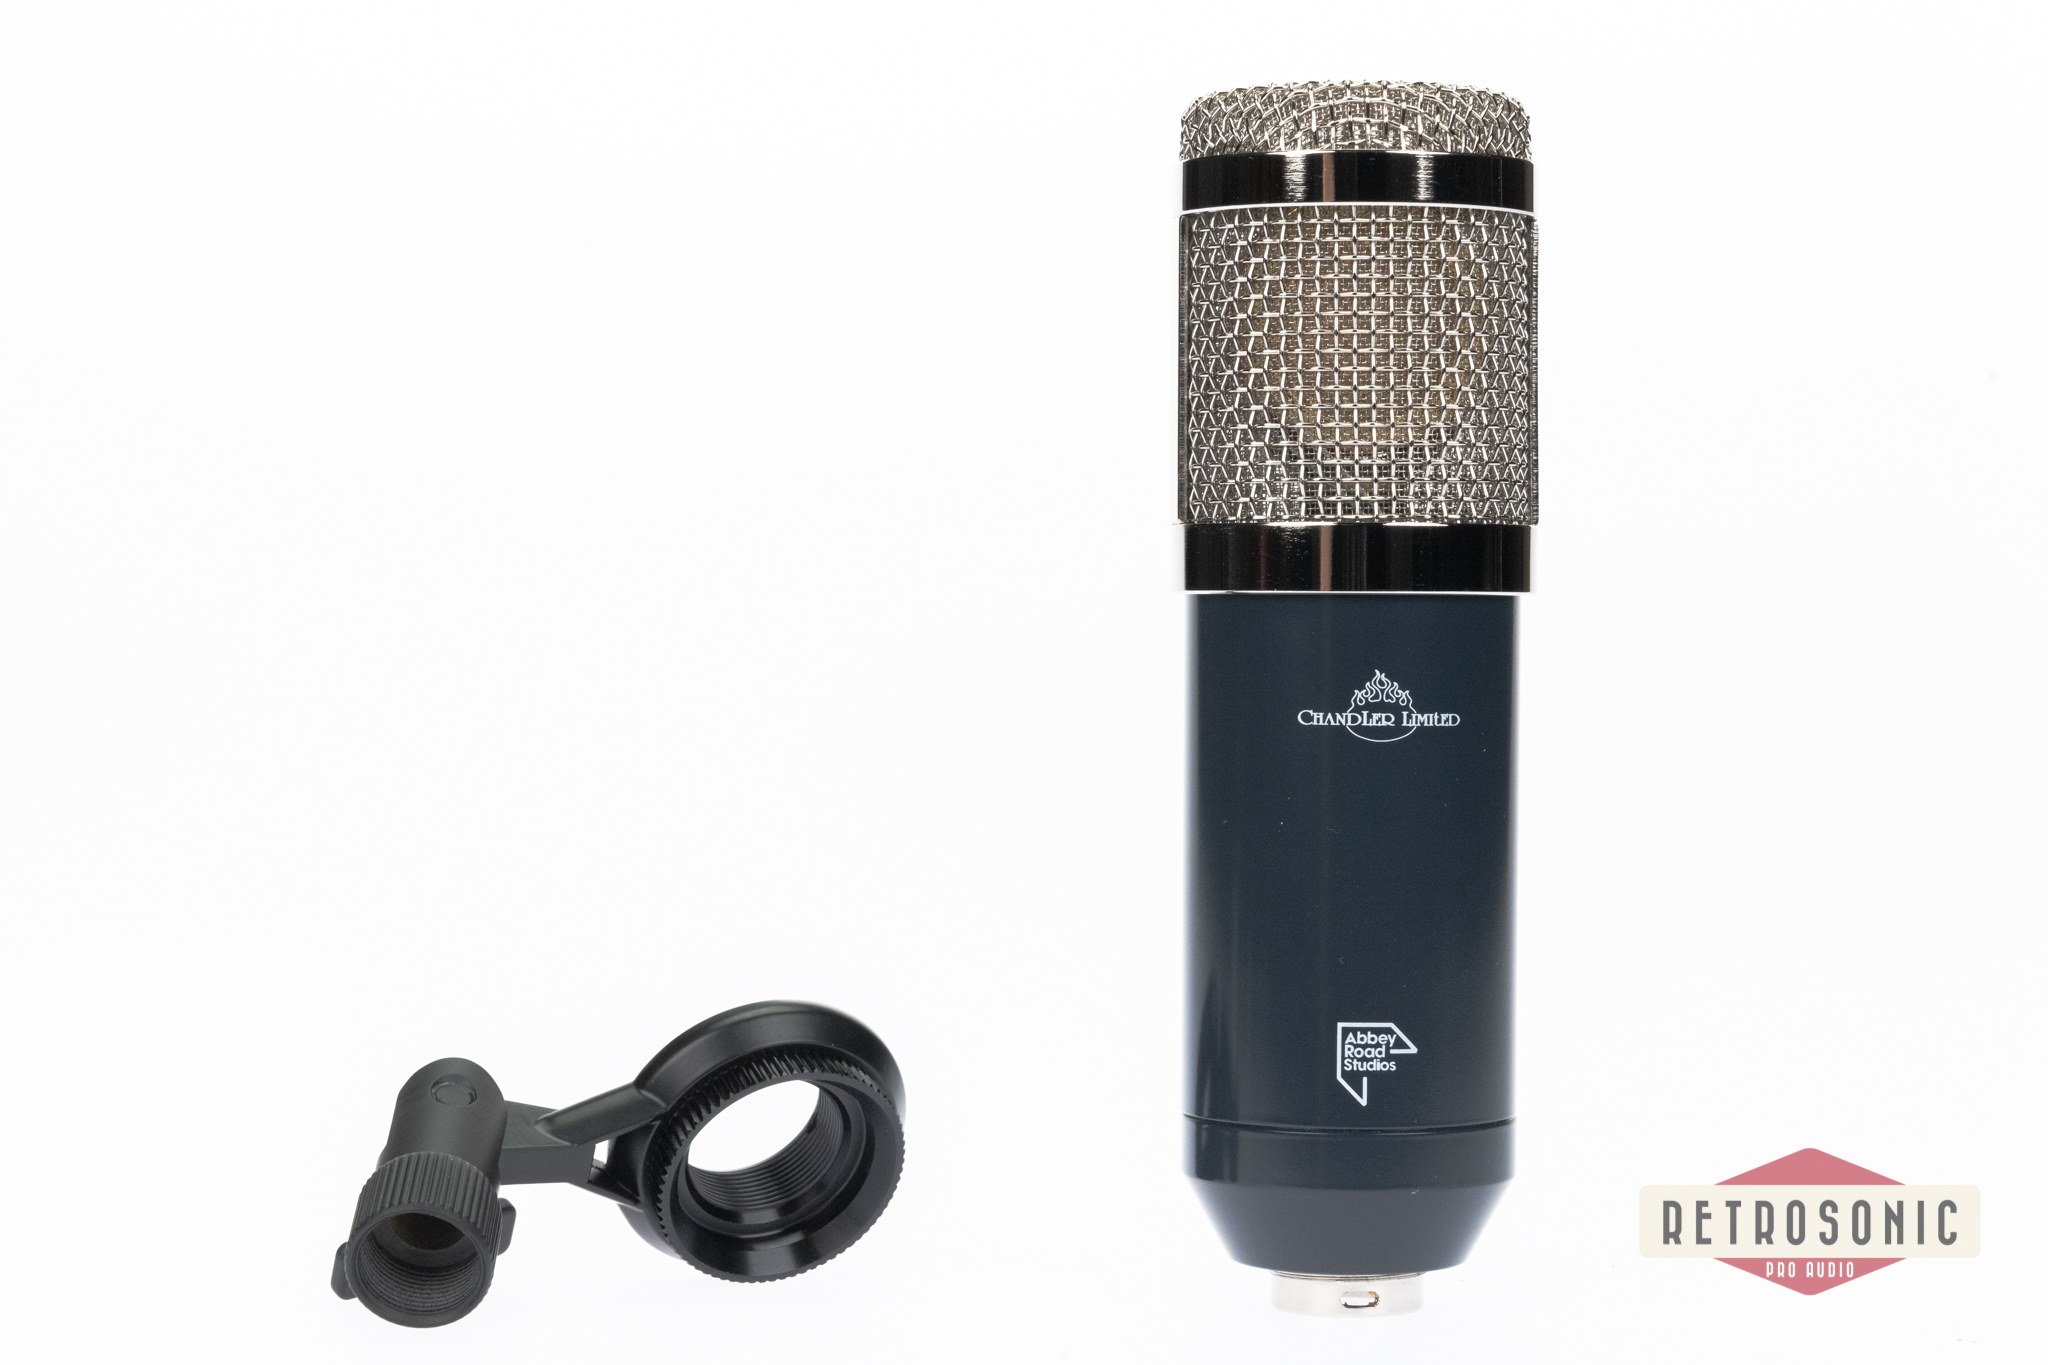 Chandler TG Microphone Type L